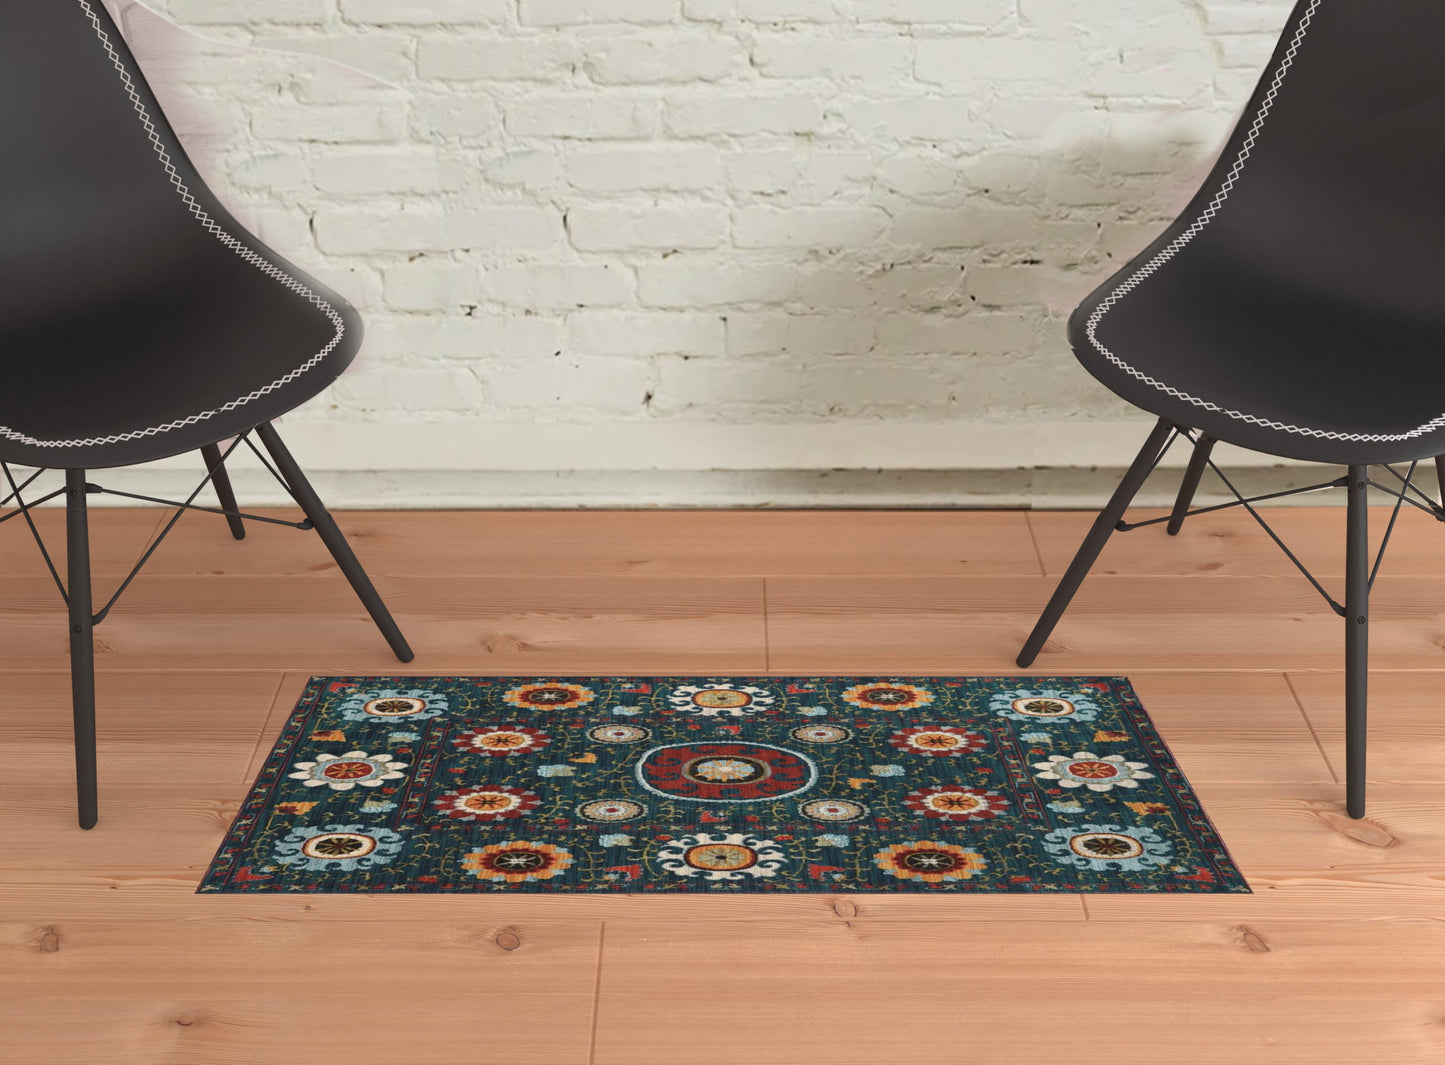 2' X 3' Teal Blue Rust Gold And Ivory Floral Power Loom Stain Resistant Area Rug